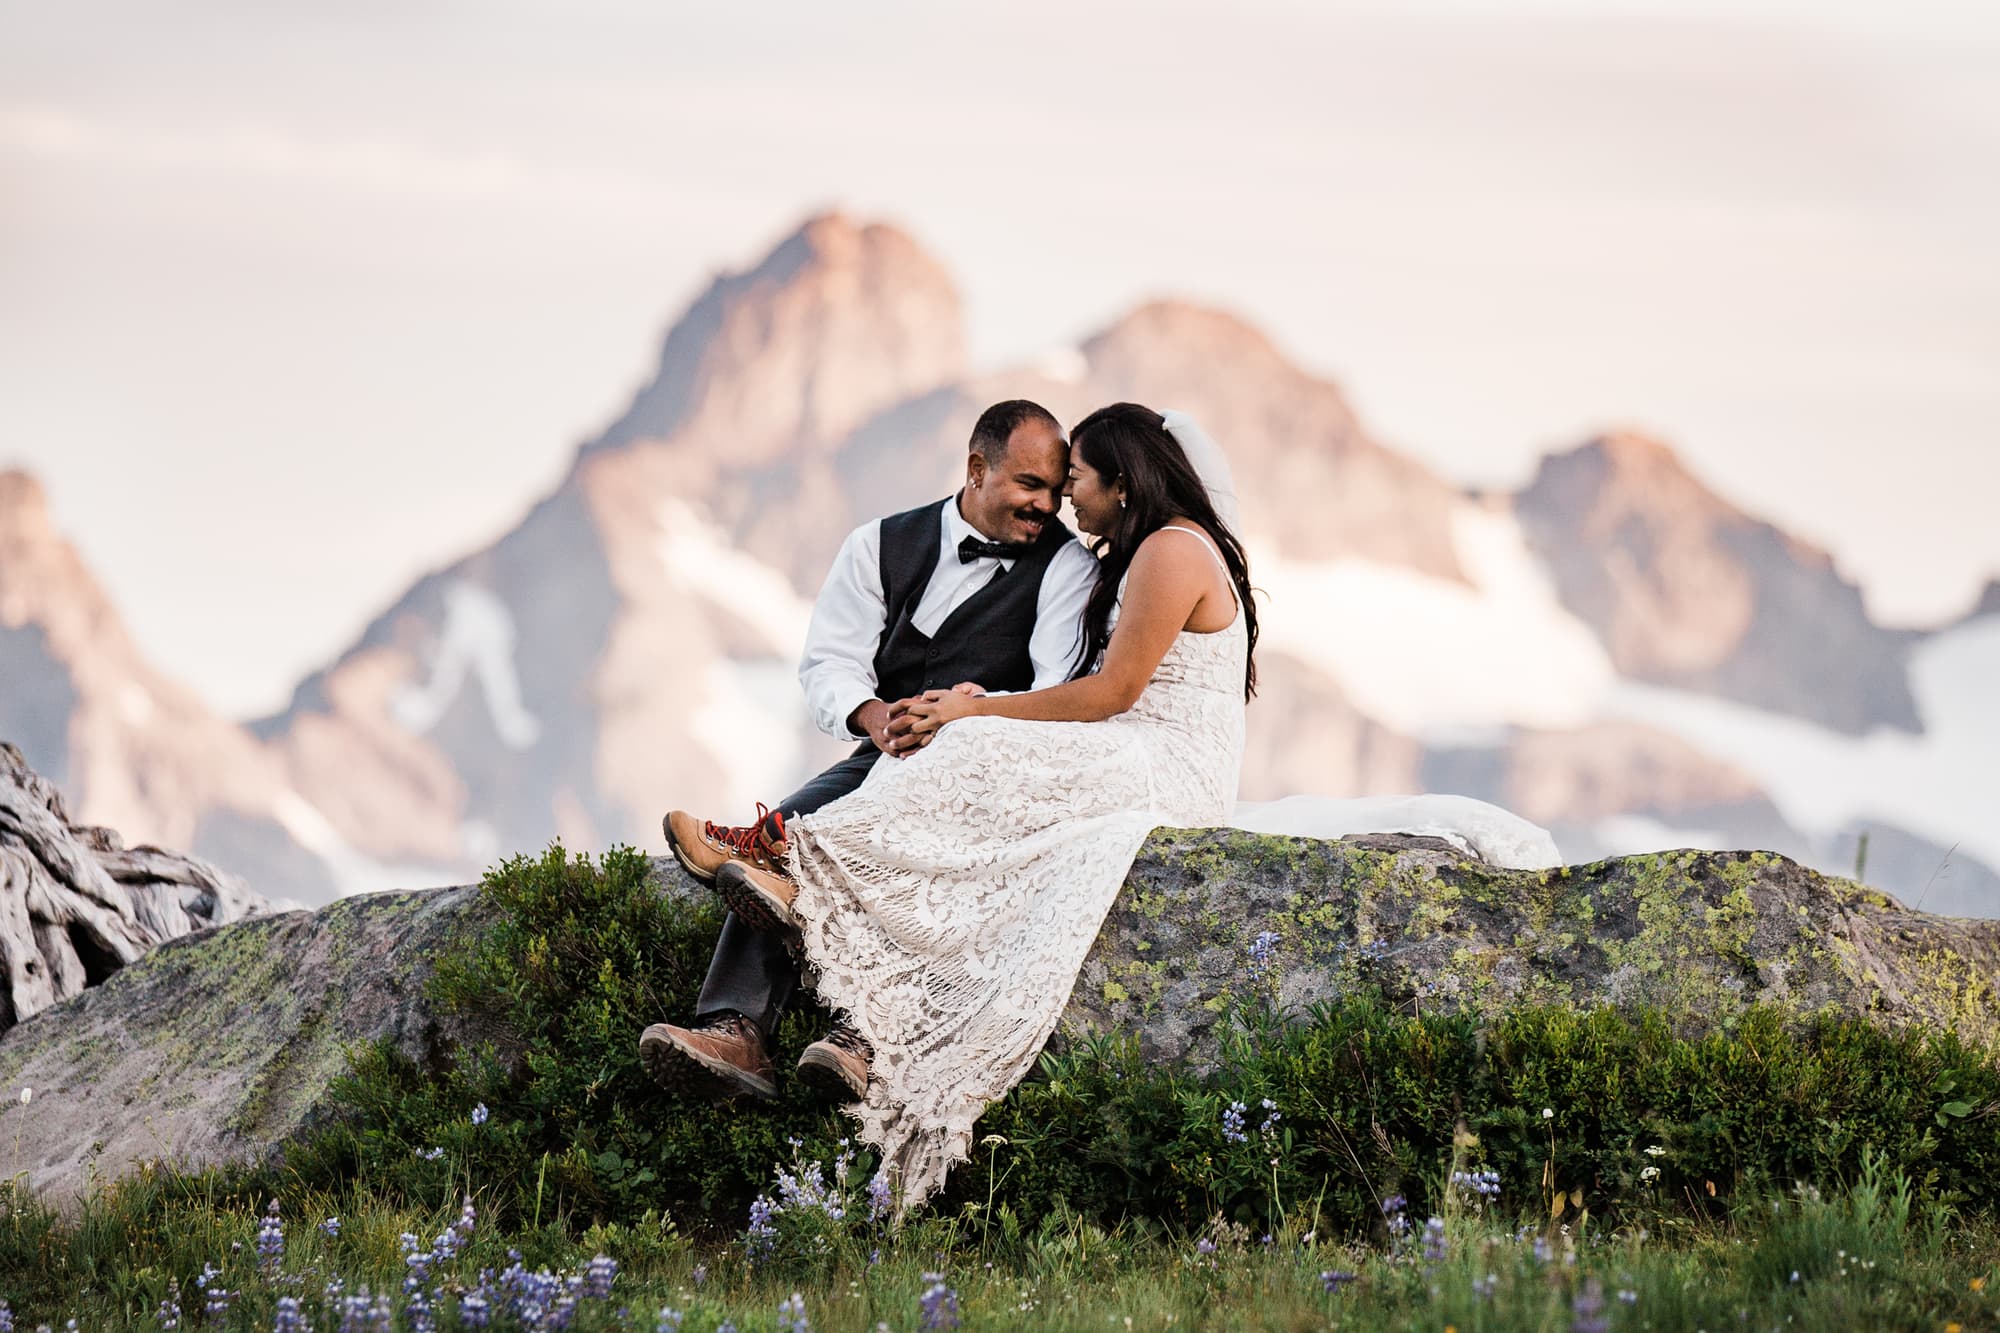 If you want to elope in Washington, this Washington elopement planning guide is for you! We talk best places, seasons, and a planning checklist!